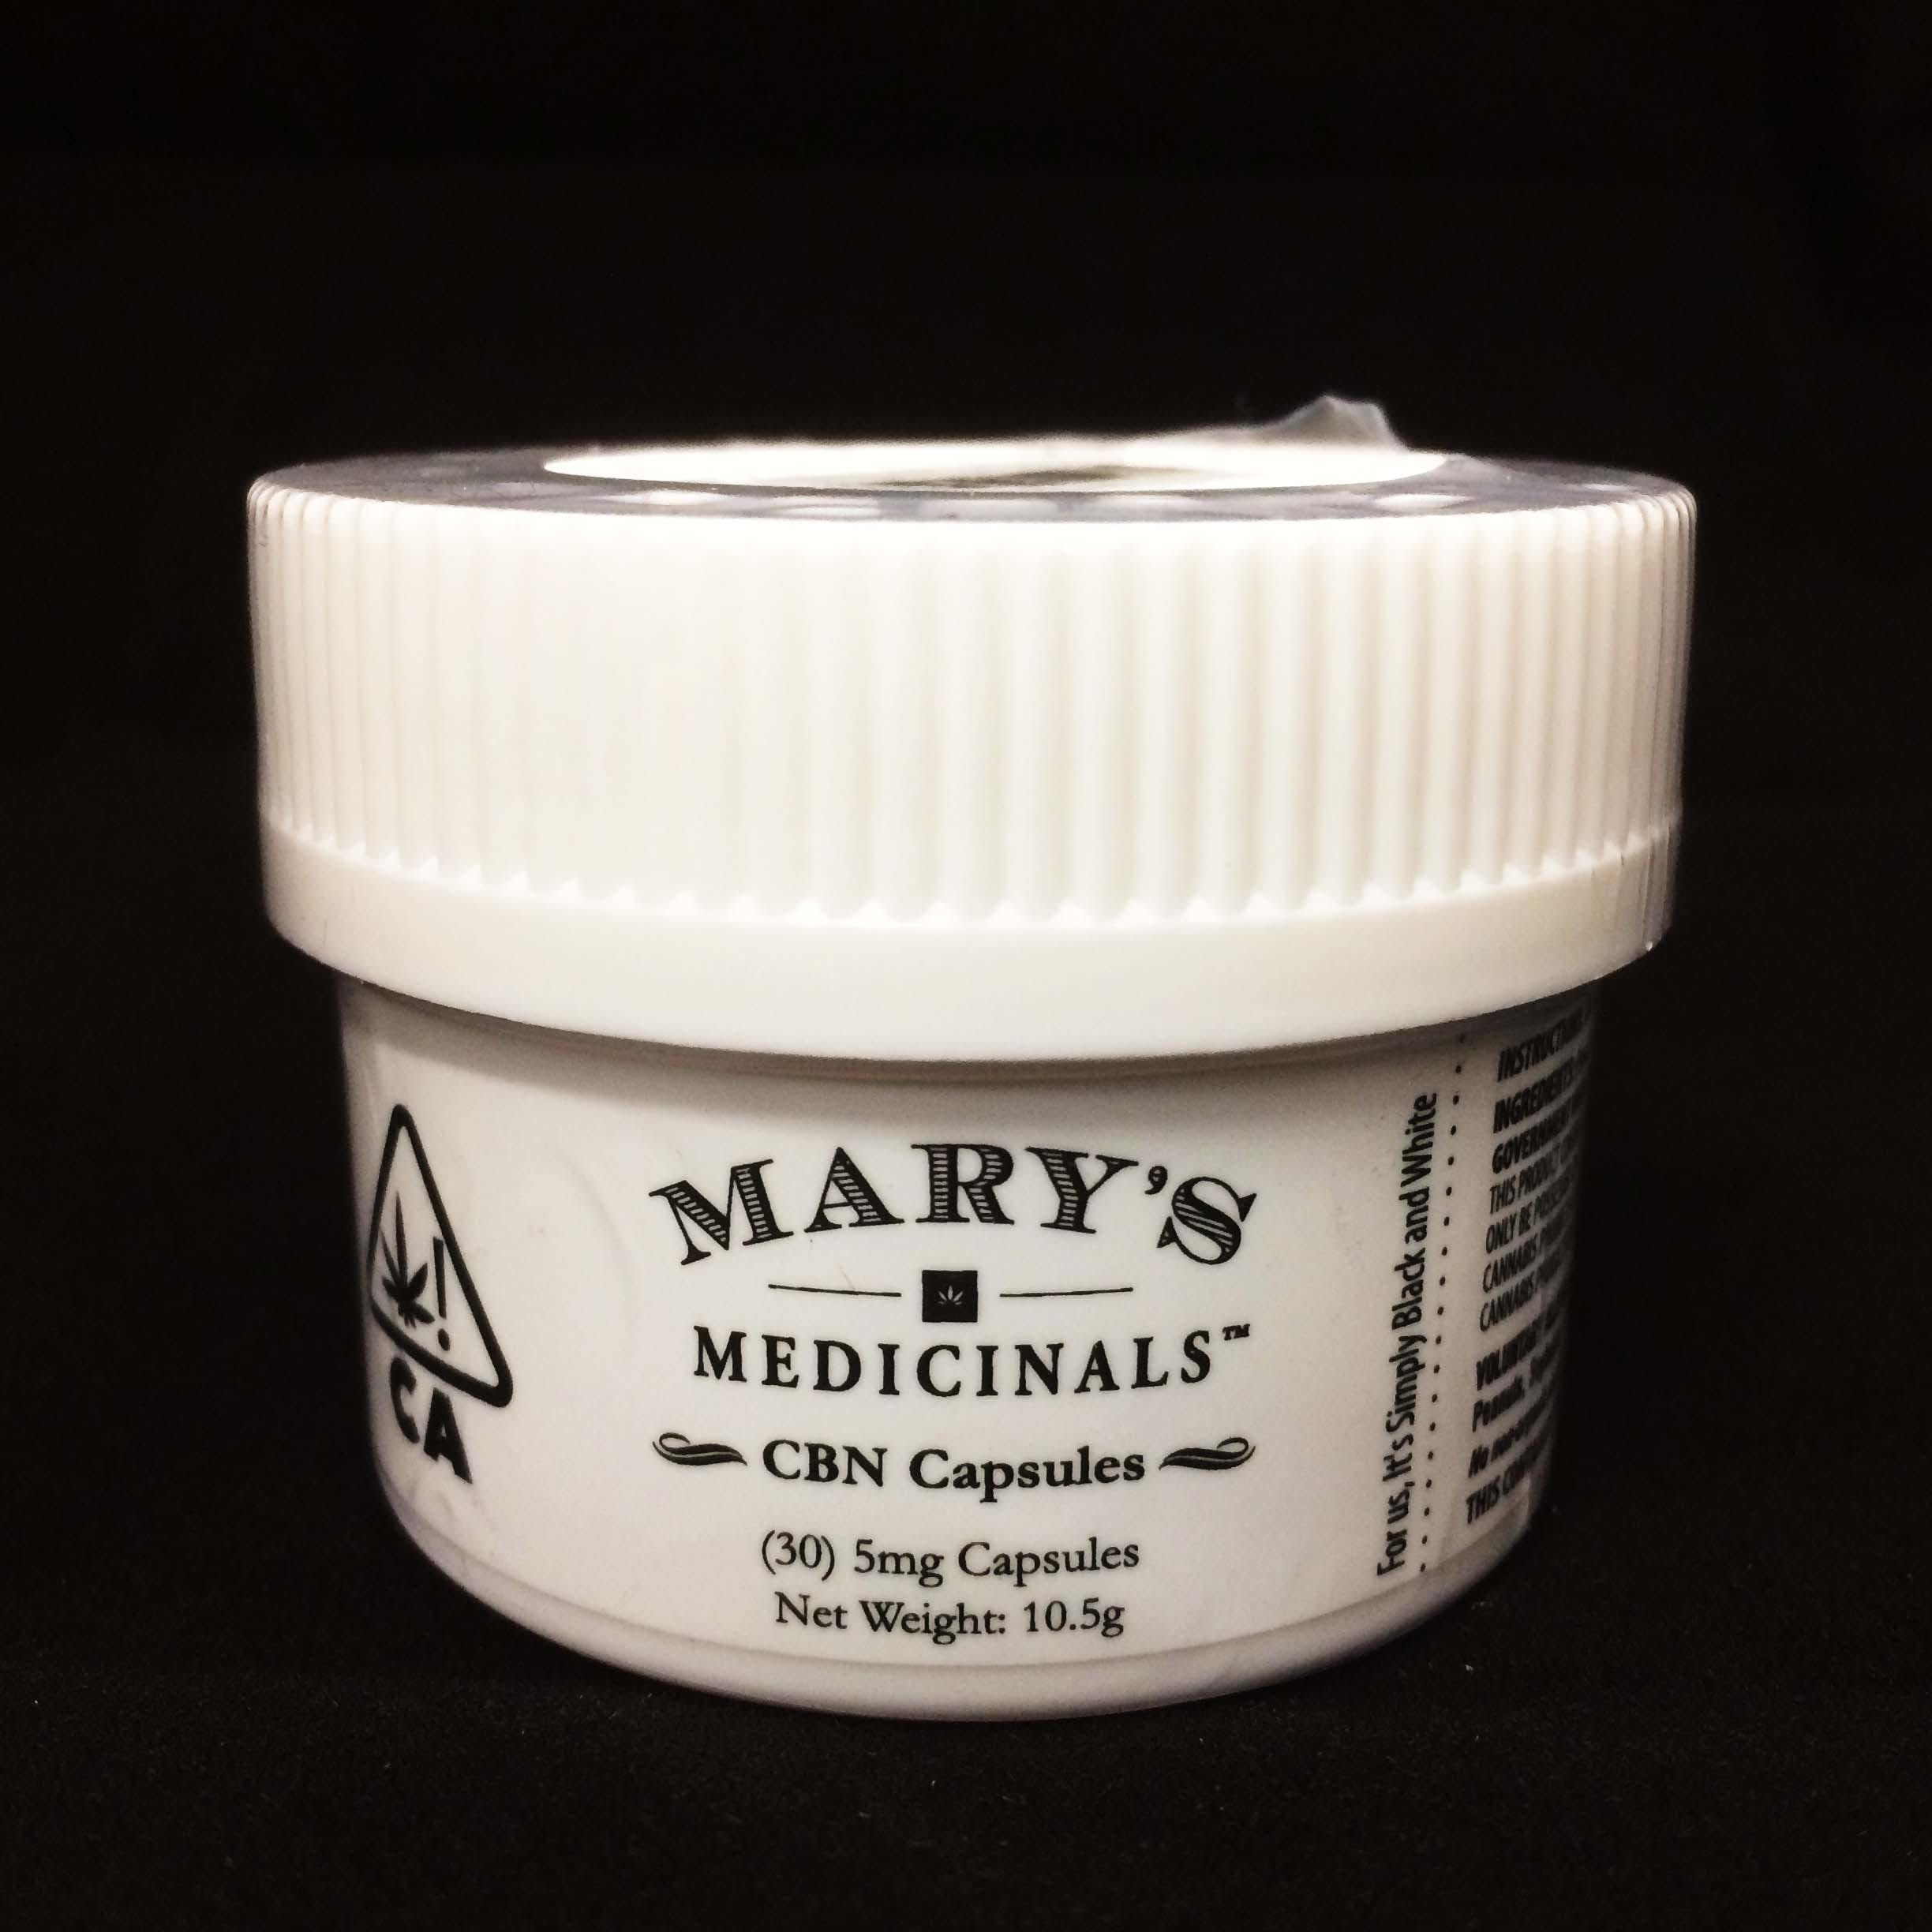 CBN Capsules 30ct. by Mary's Medicinals